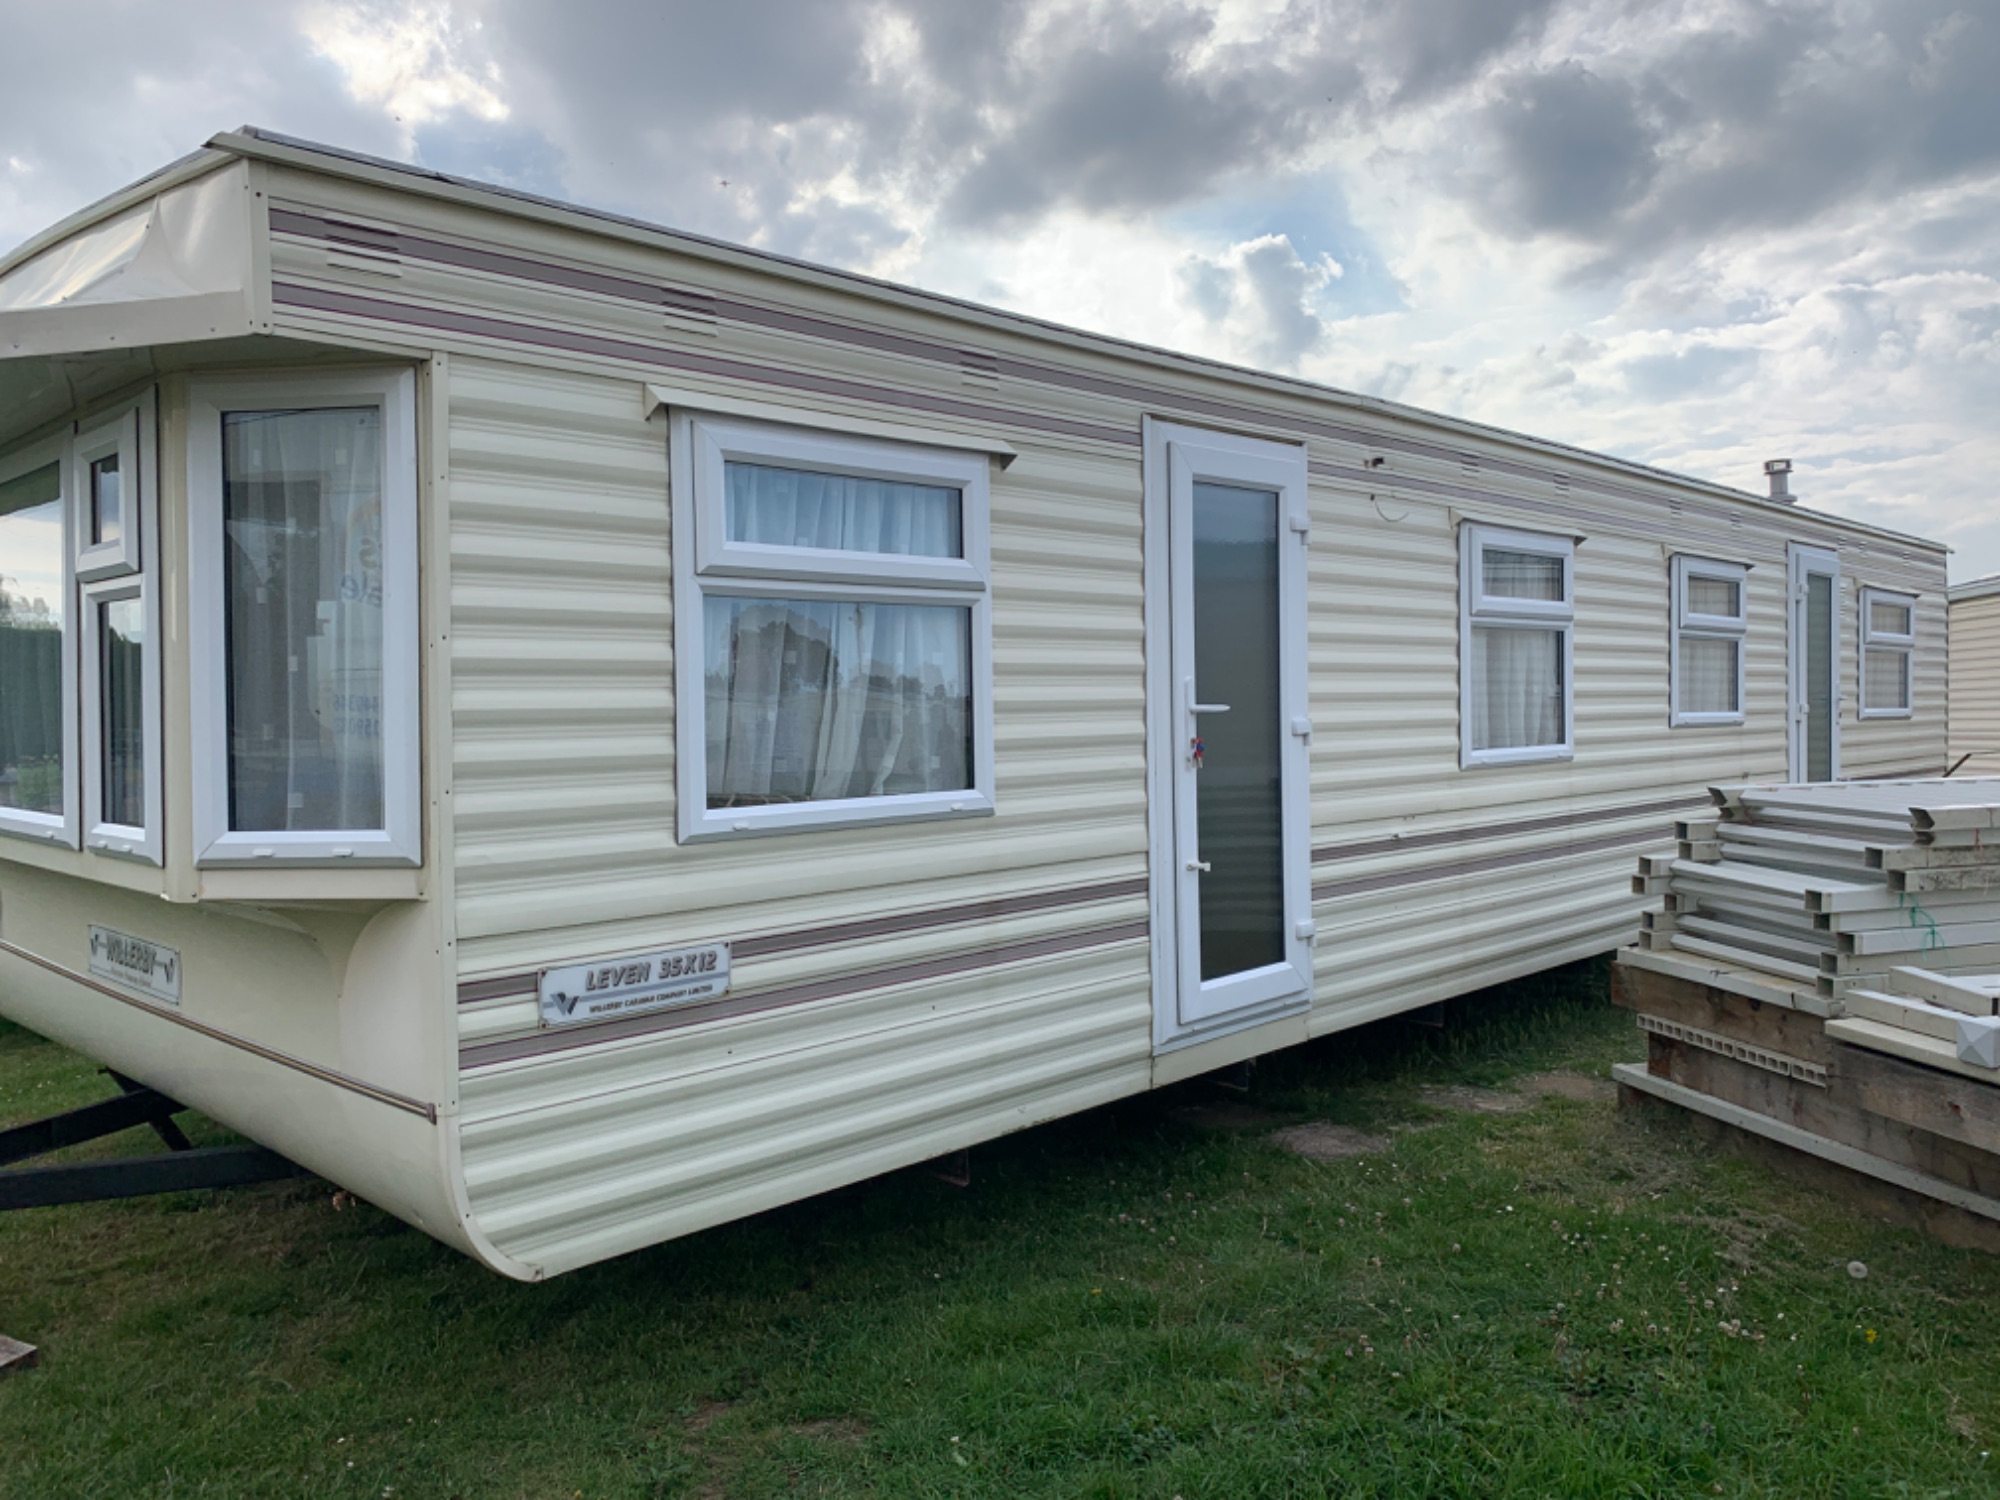 Willerby Leven 35 x 12-2 bed